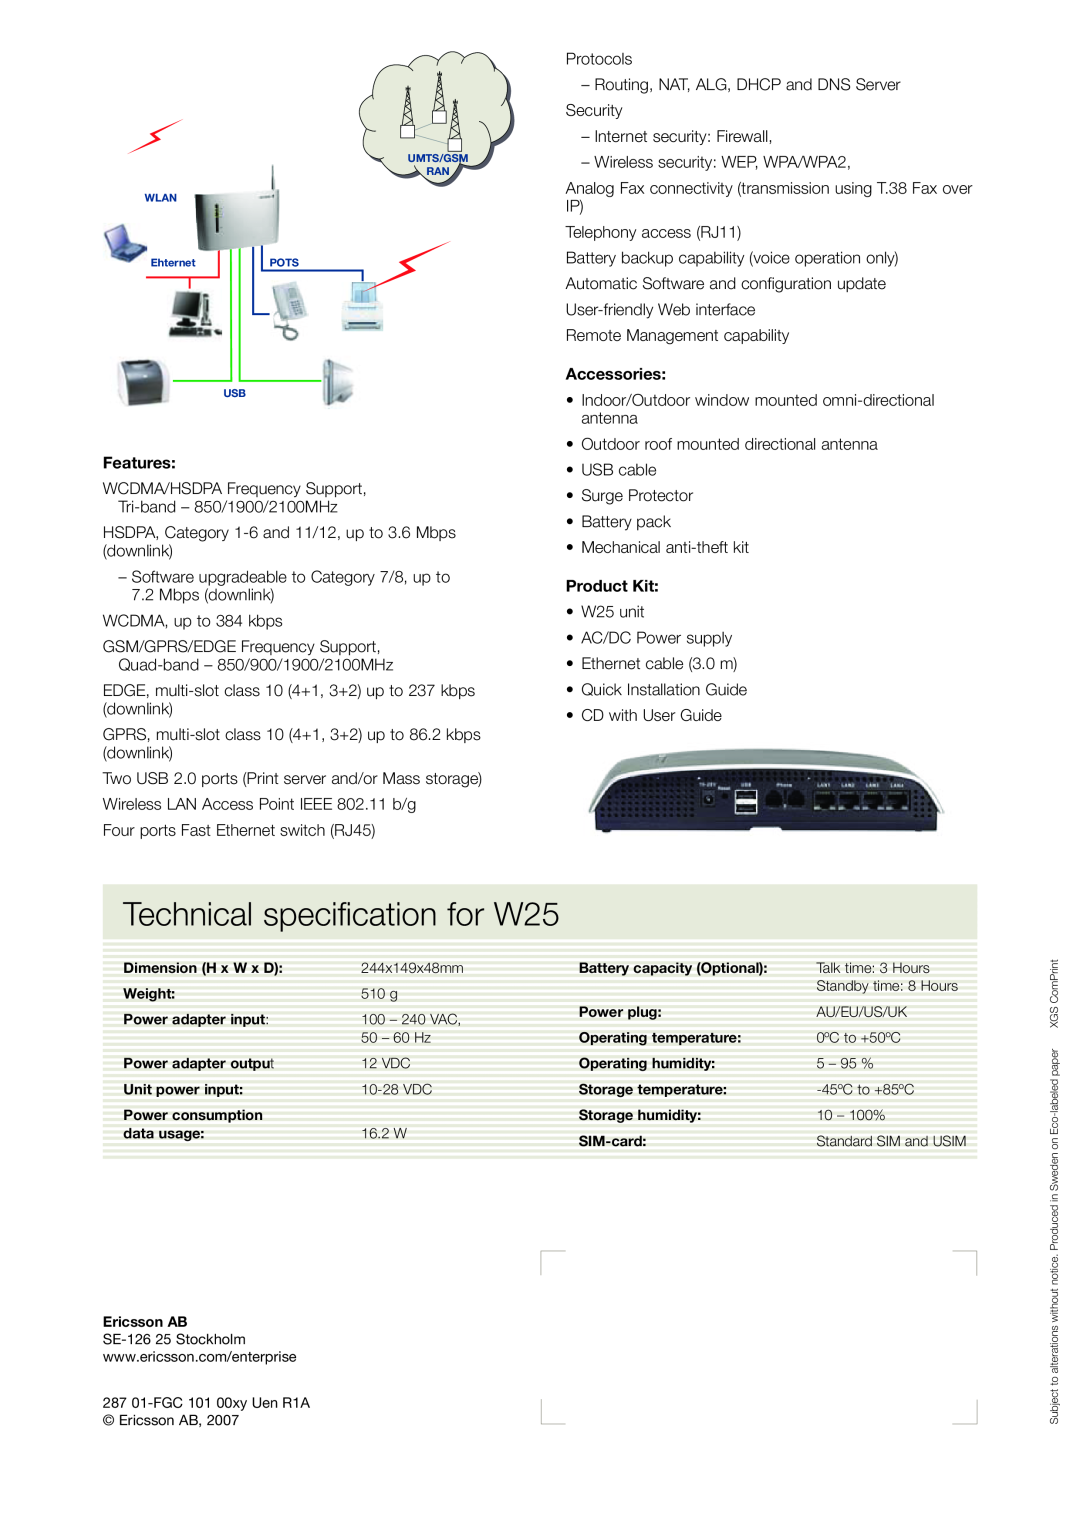 Ericsson manual Accessories, Features, Product Kit, Technical specification for W25 